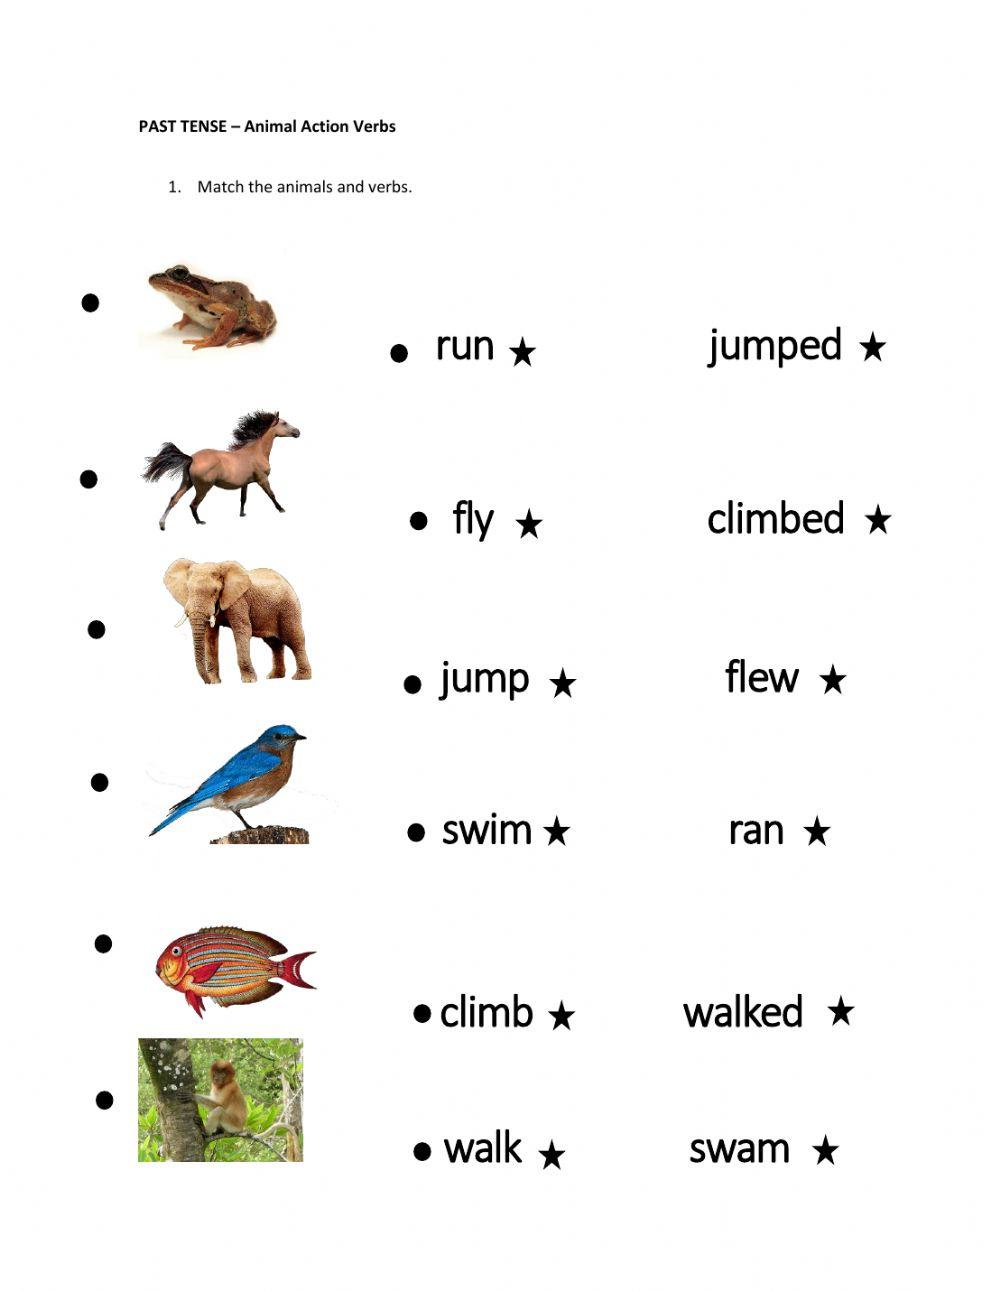 PAST SIMPLE - animals action verbs